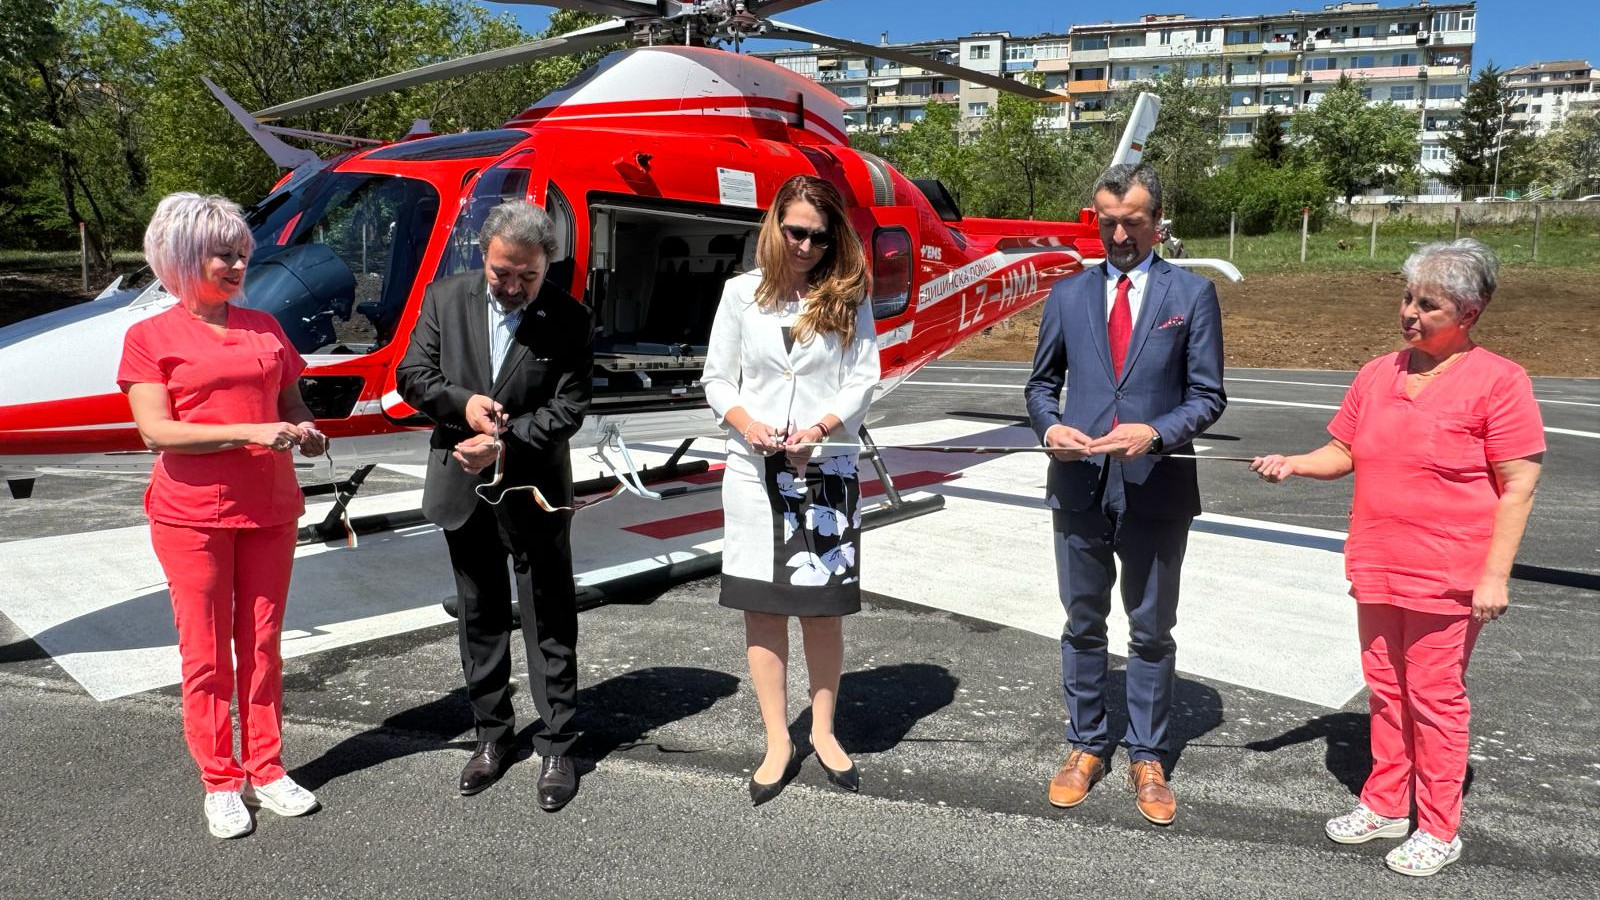 Veliko Tarnovo now has a heliport for emergency medical assistance by air